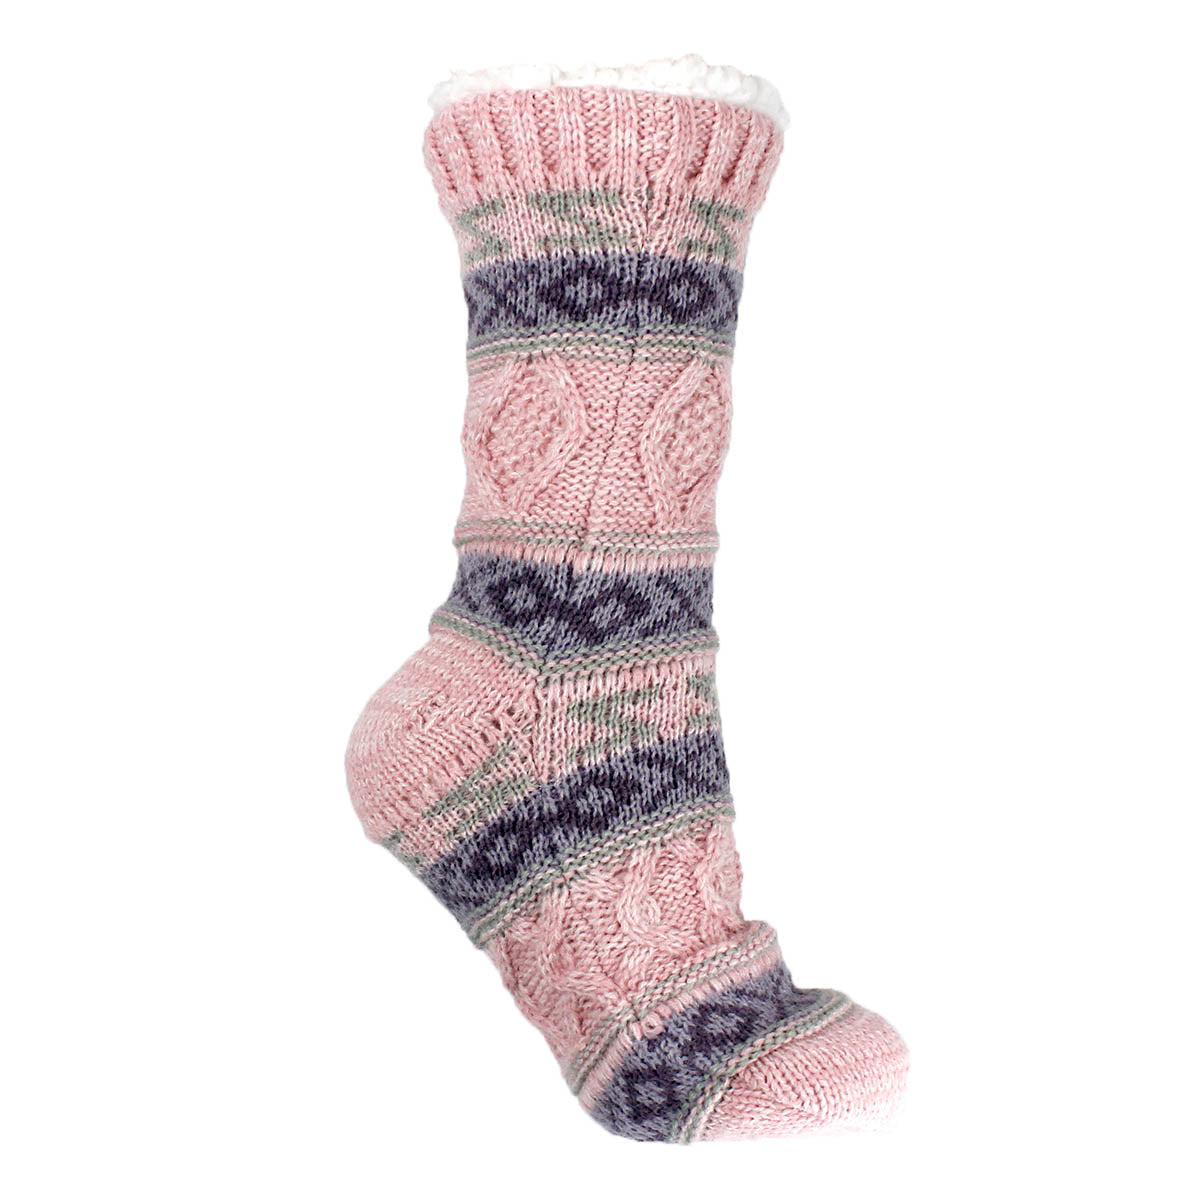 Women's Non-Skid Warm Soft and Fuzzy Shea Butter and Rose Oil Infused "Book Lovers" Slipper Socks, Grey